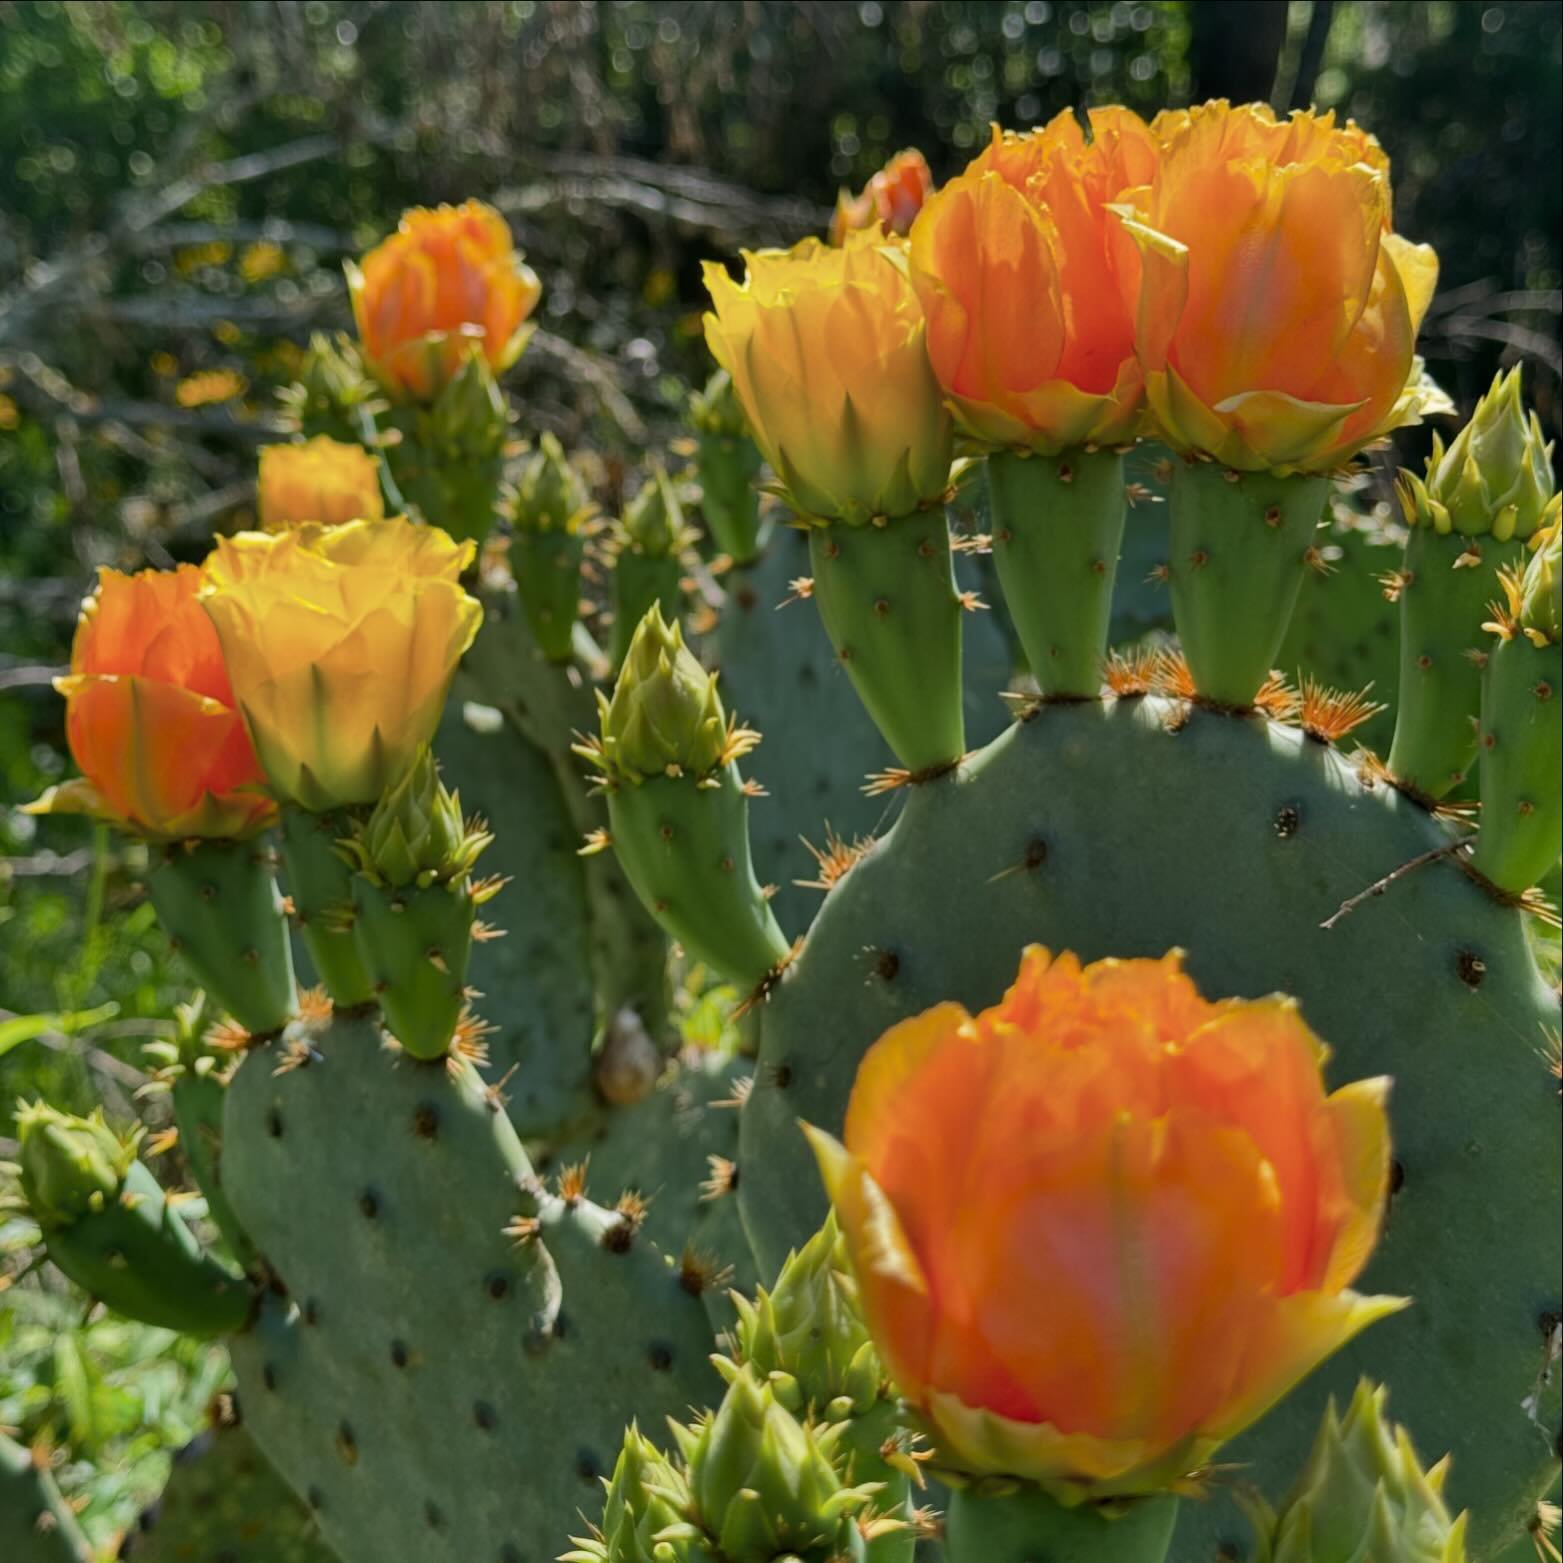 The prickly pears in Austin are putting on quite a show this week.